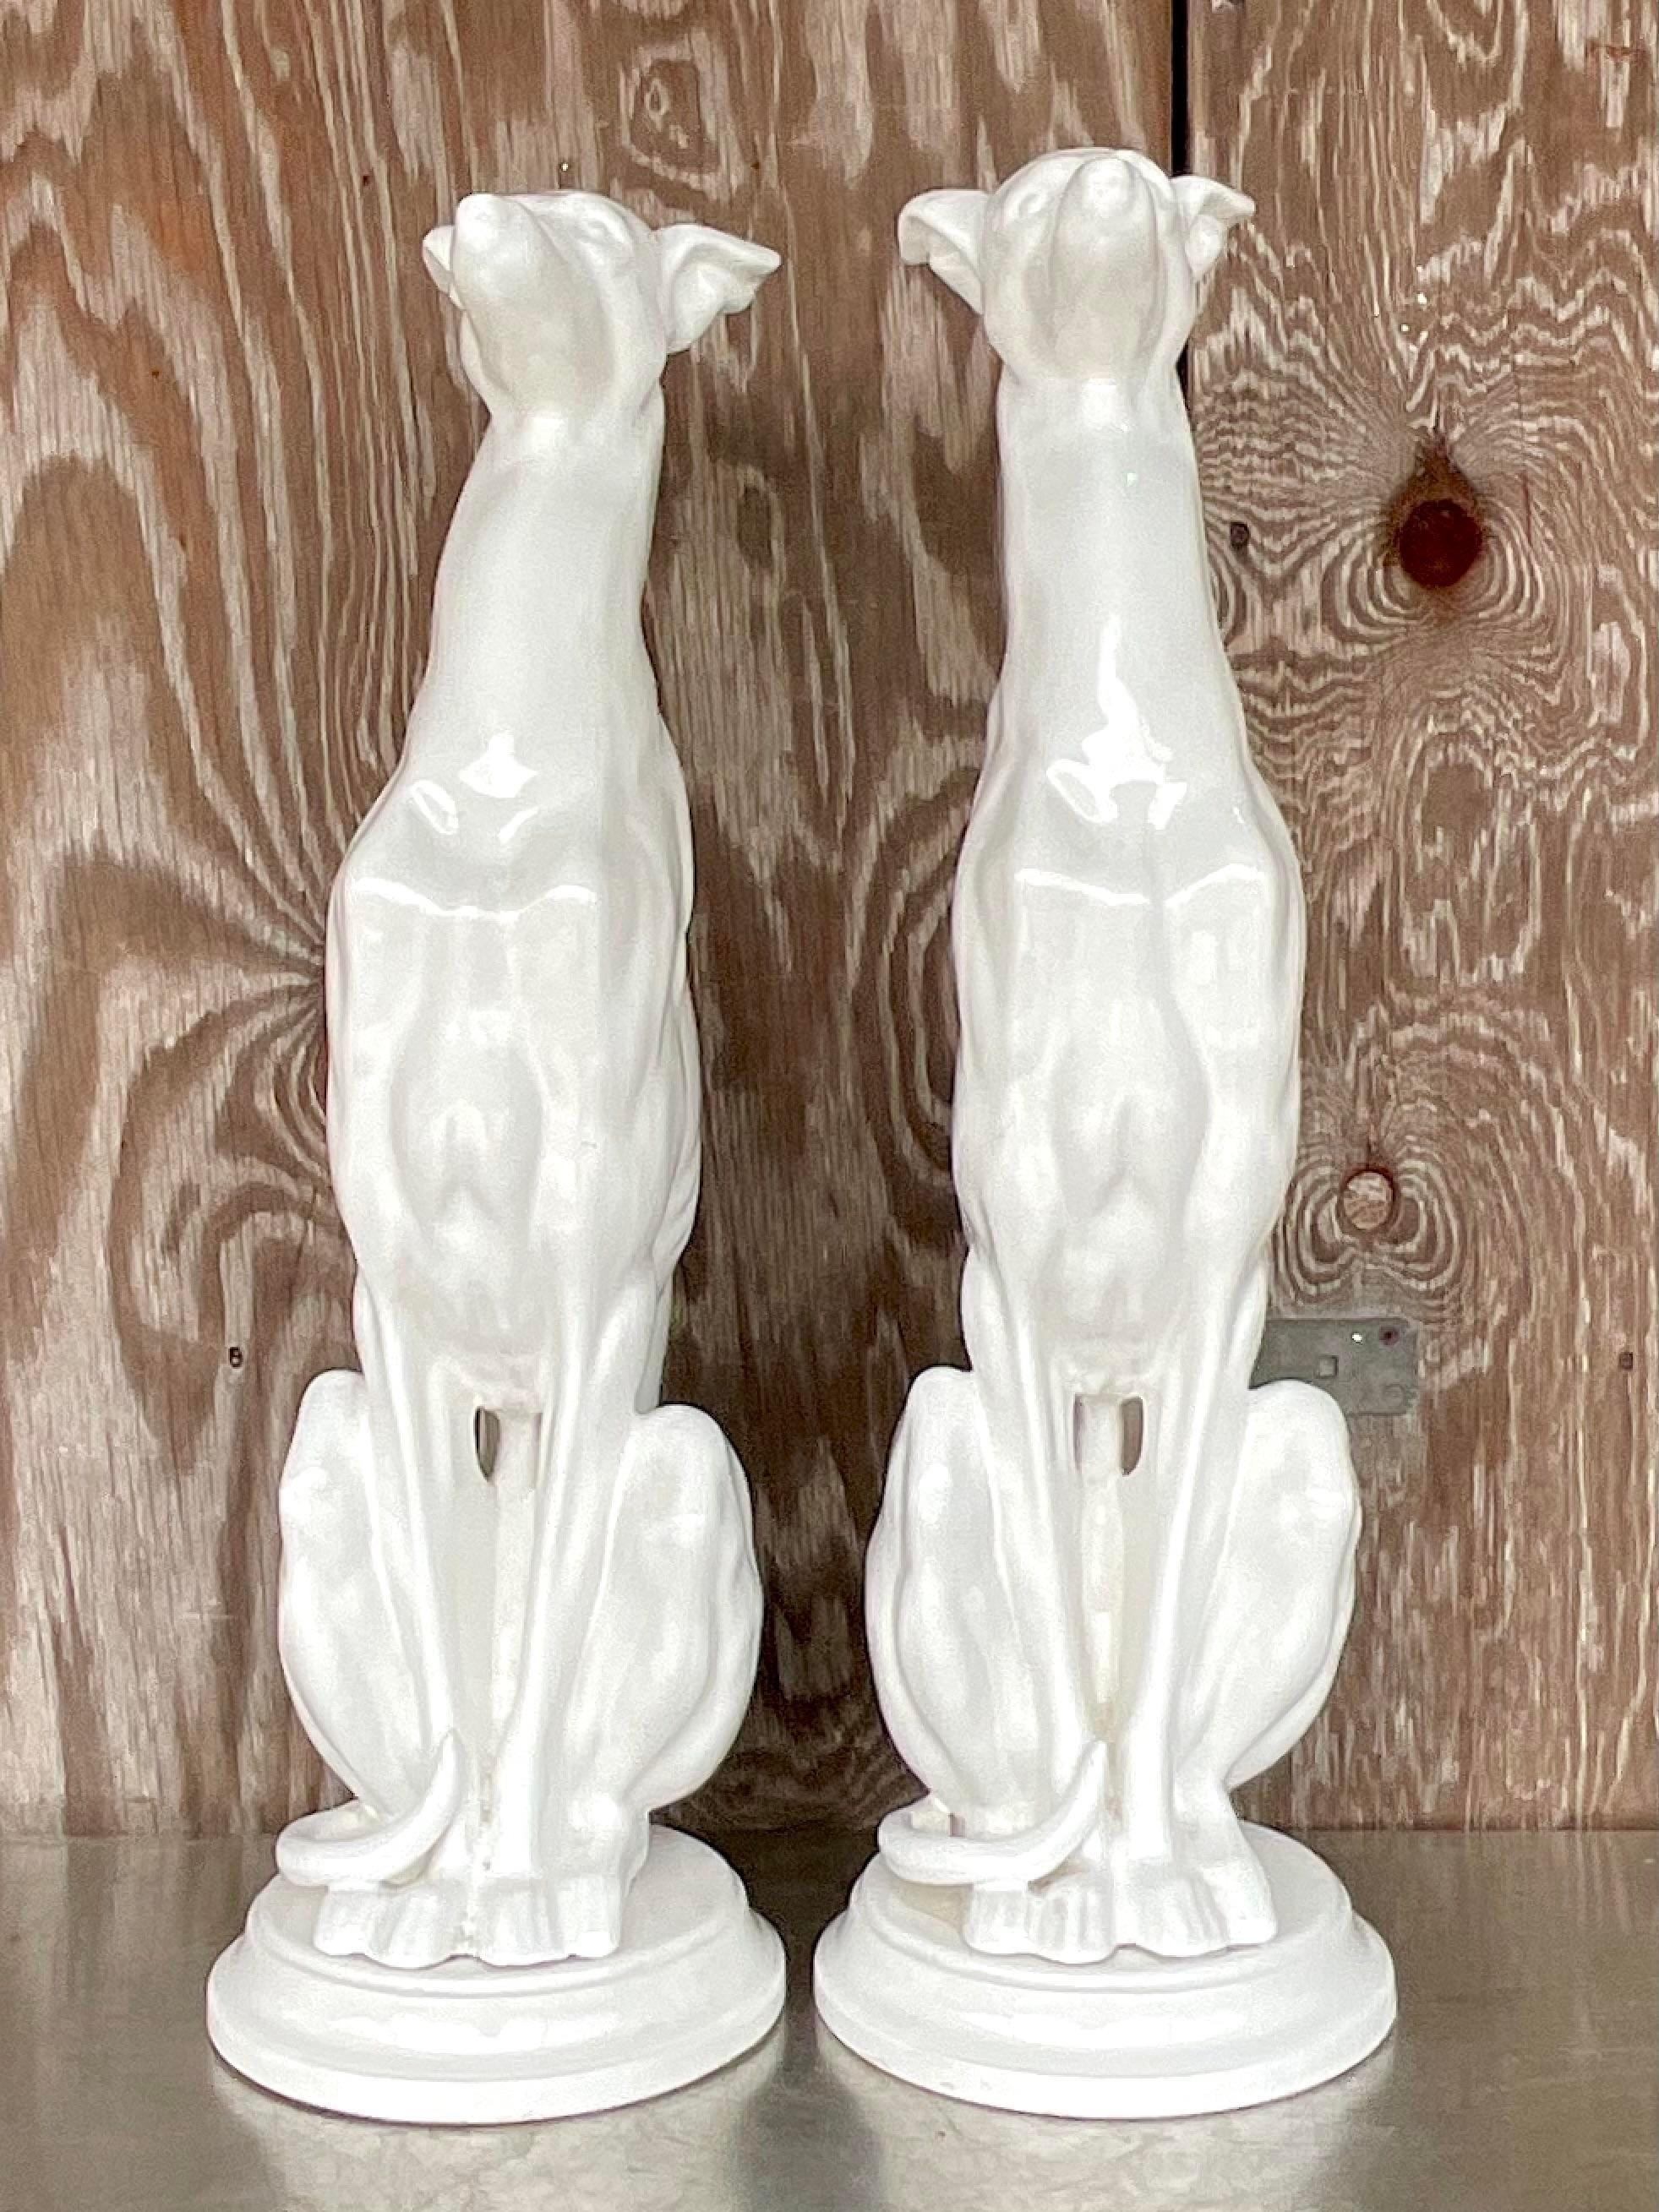 Late 20th Century Vintage Regency Glazed Ceramic Whippets - a Pair For Sale 1